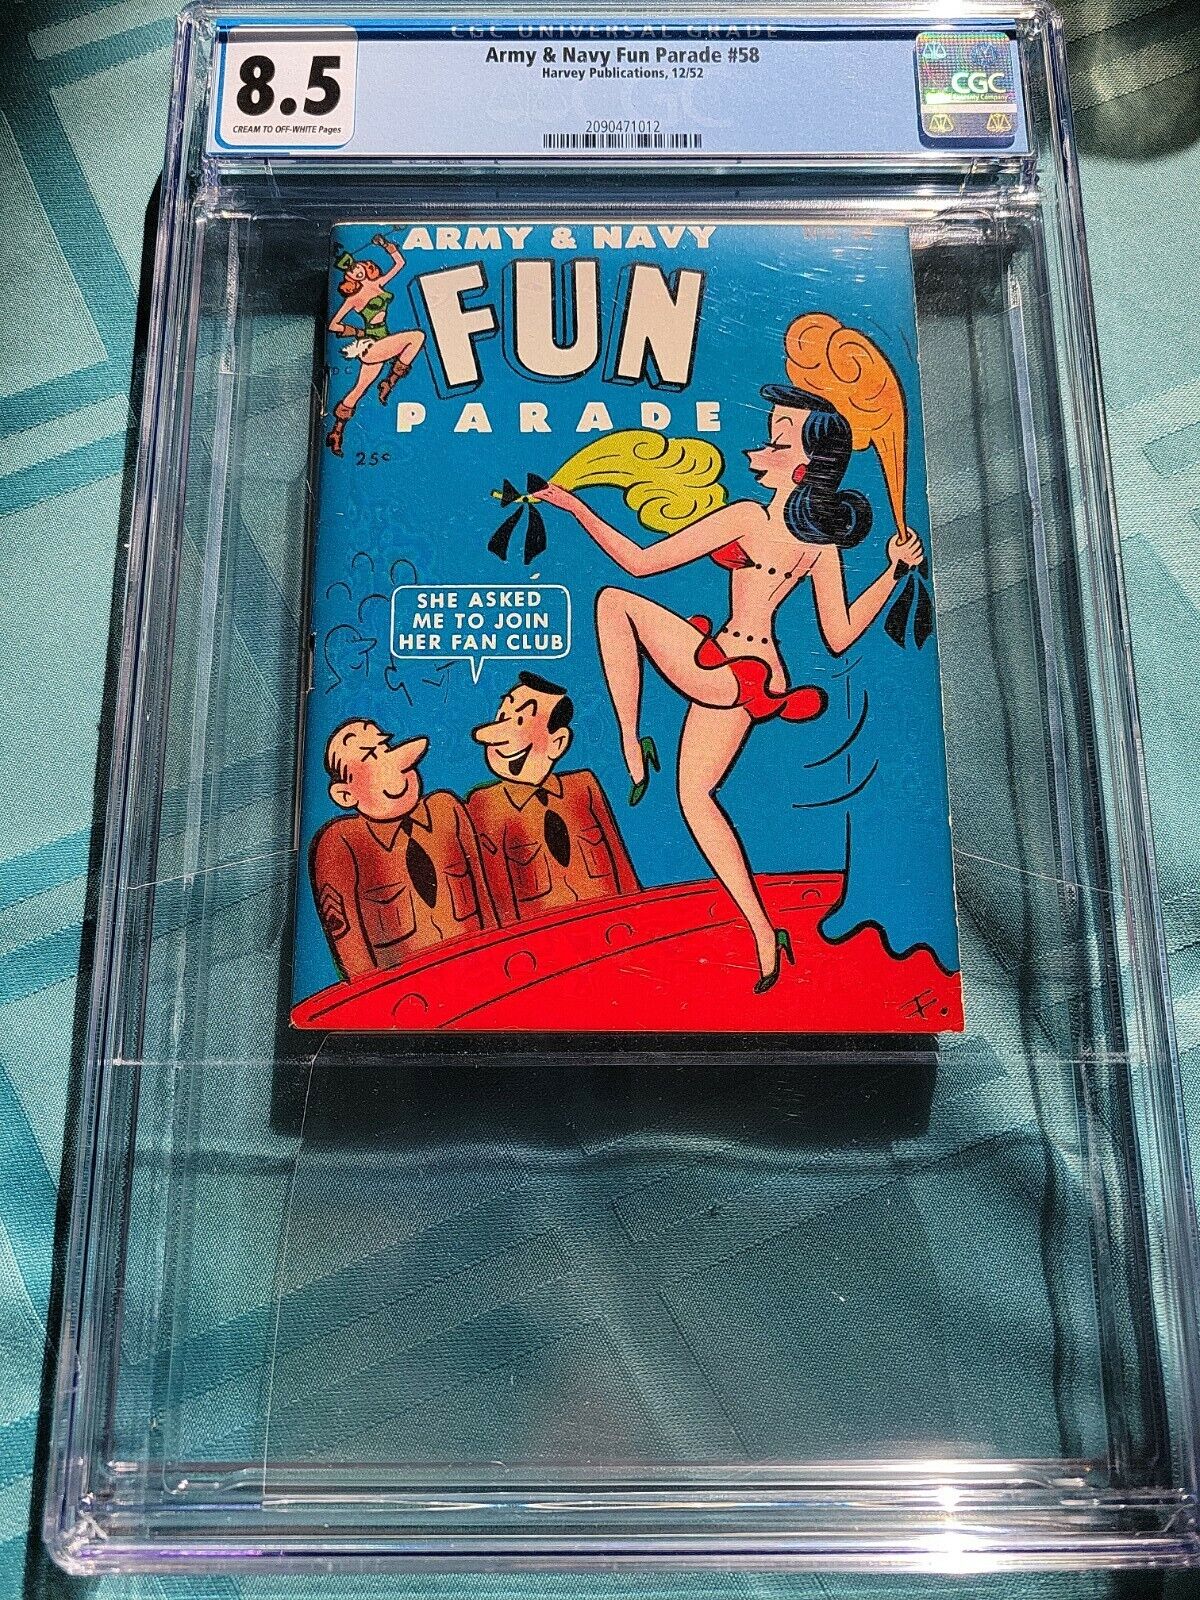 Army & Navy Fun Parade 58 CGC 8.5 1952 only copy graded 